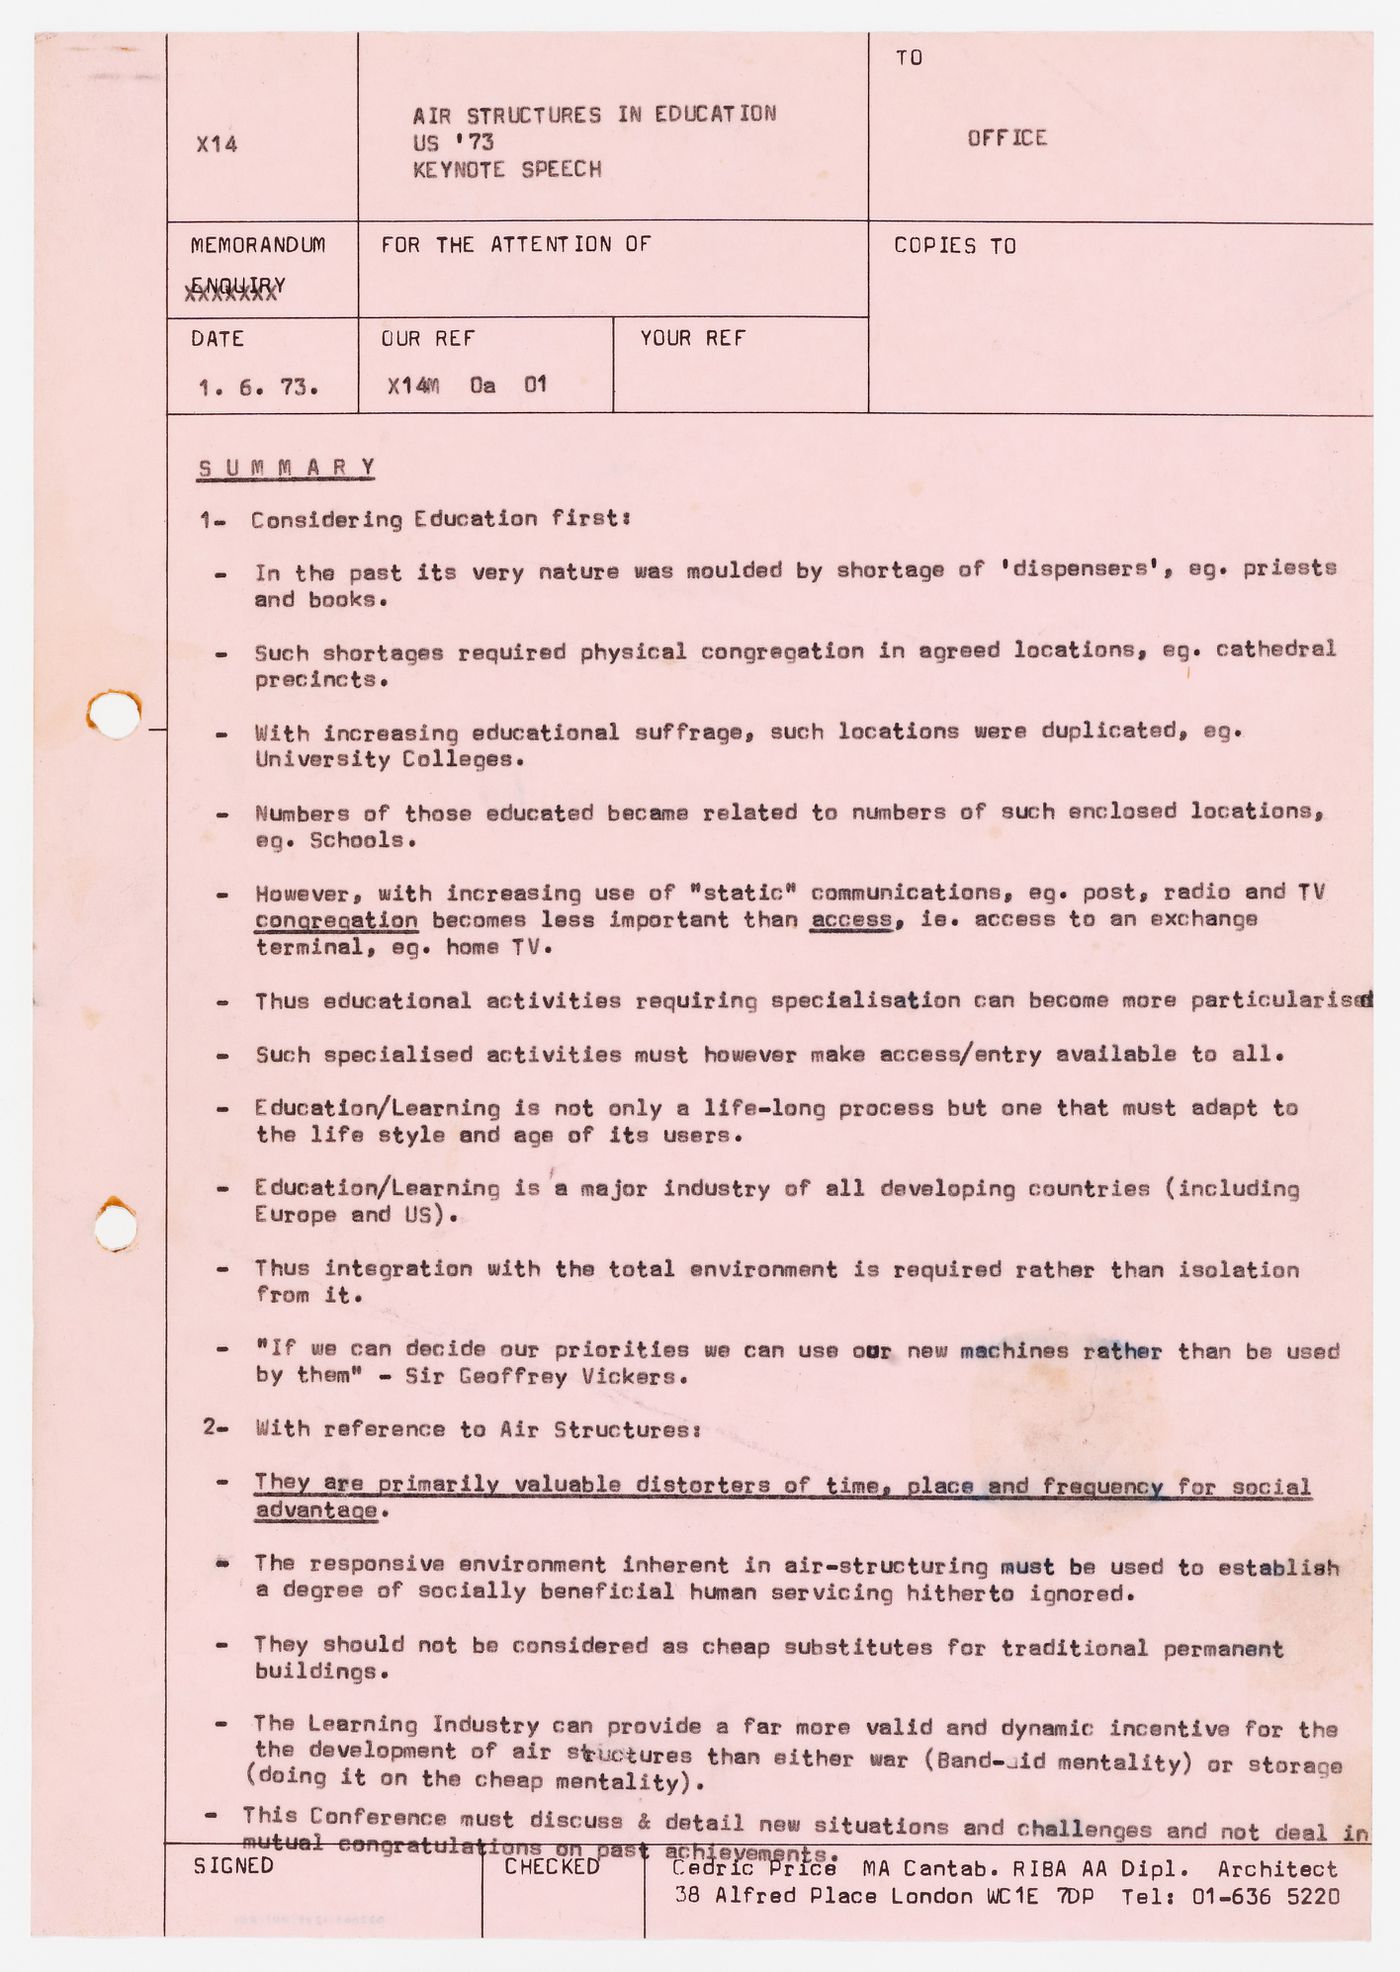 Memorandum to Office about keynote speech at Air Structures in Education conference of 1973